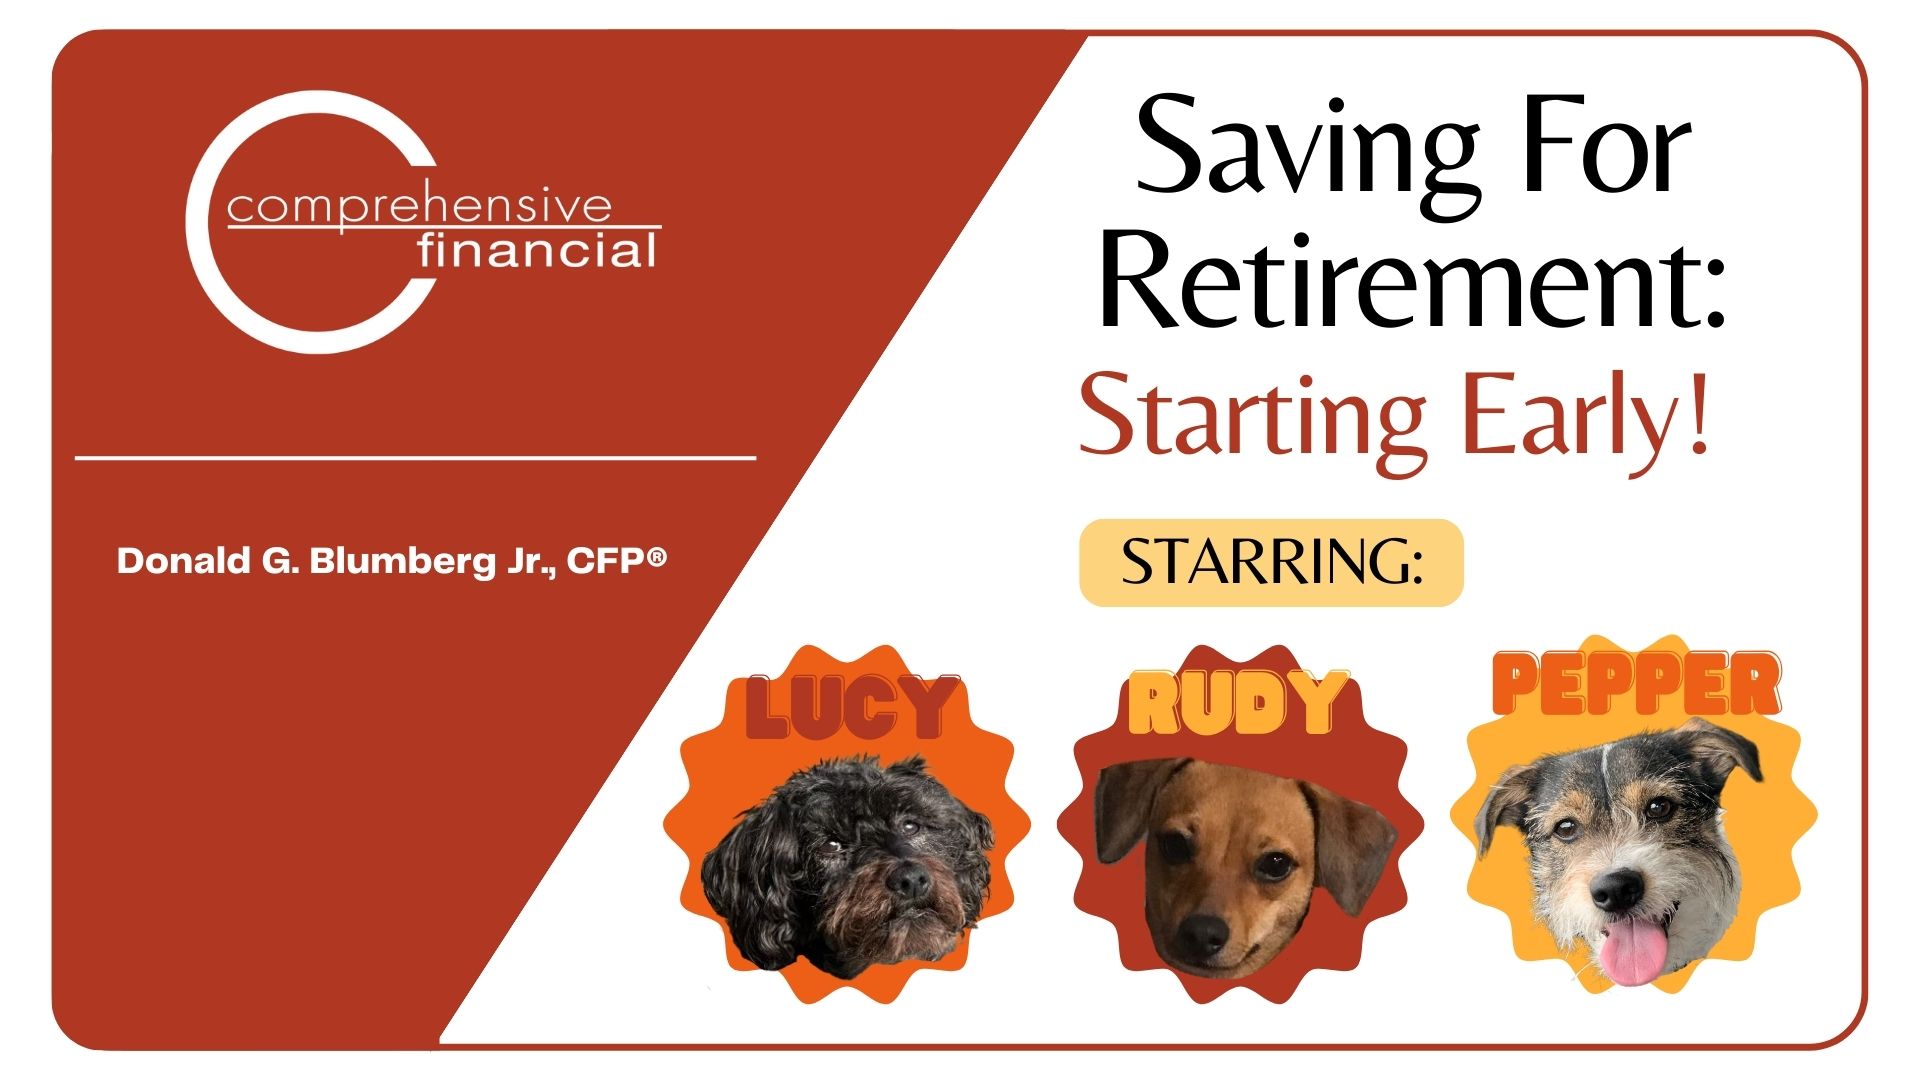 Saving For Retirement: Starting Early!